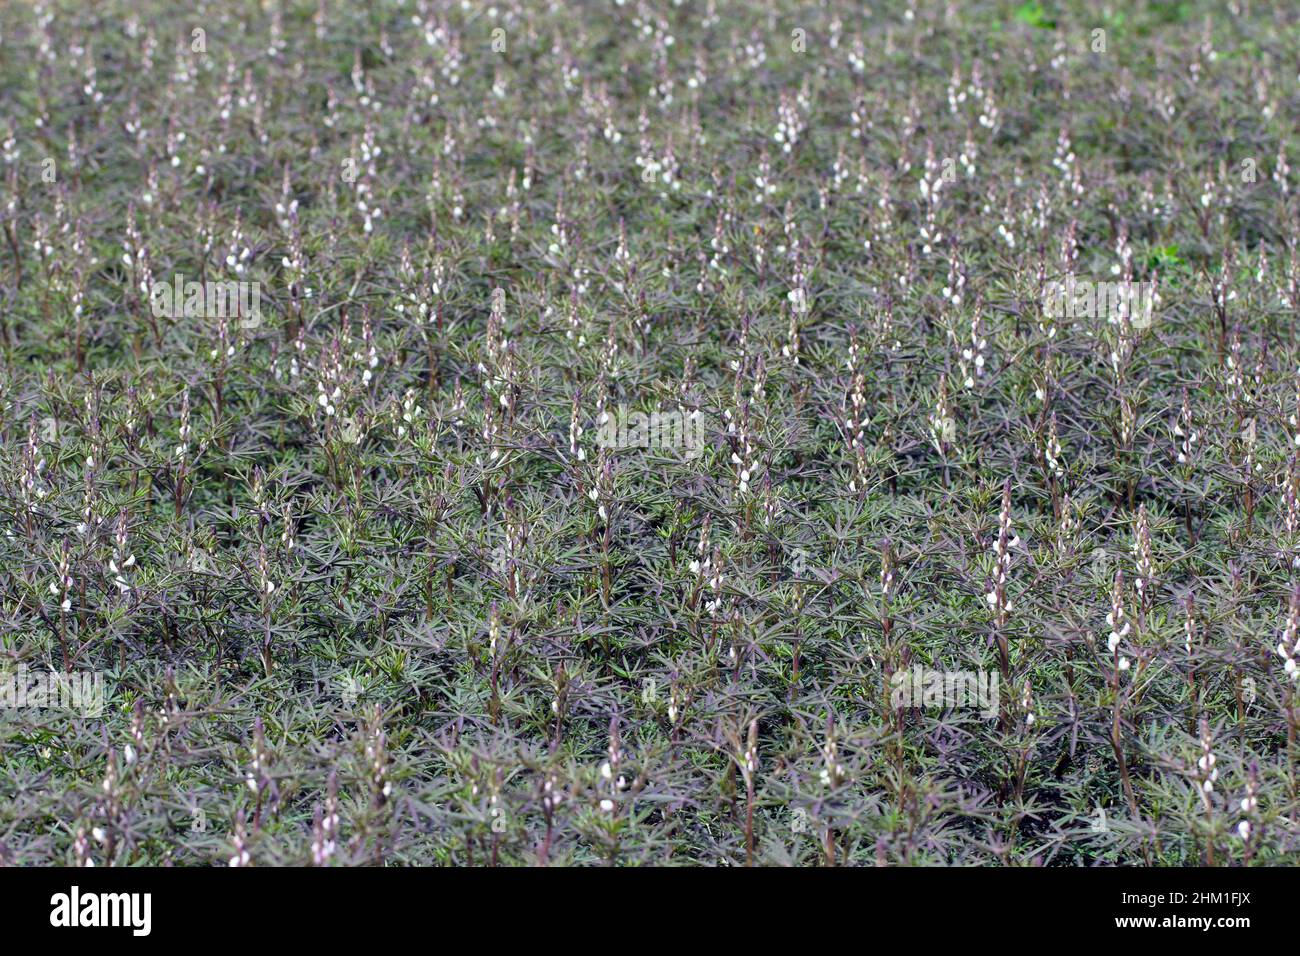 Field with white lupine crops Stock Photo